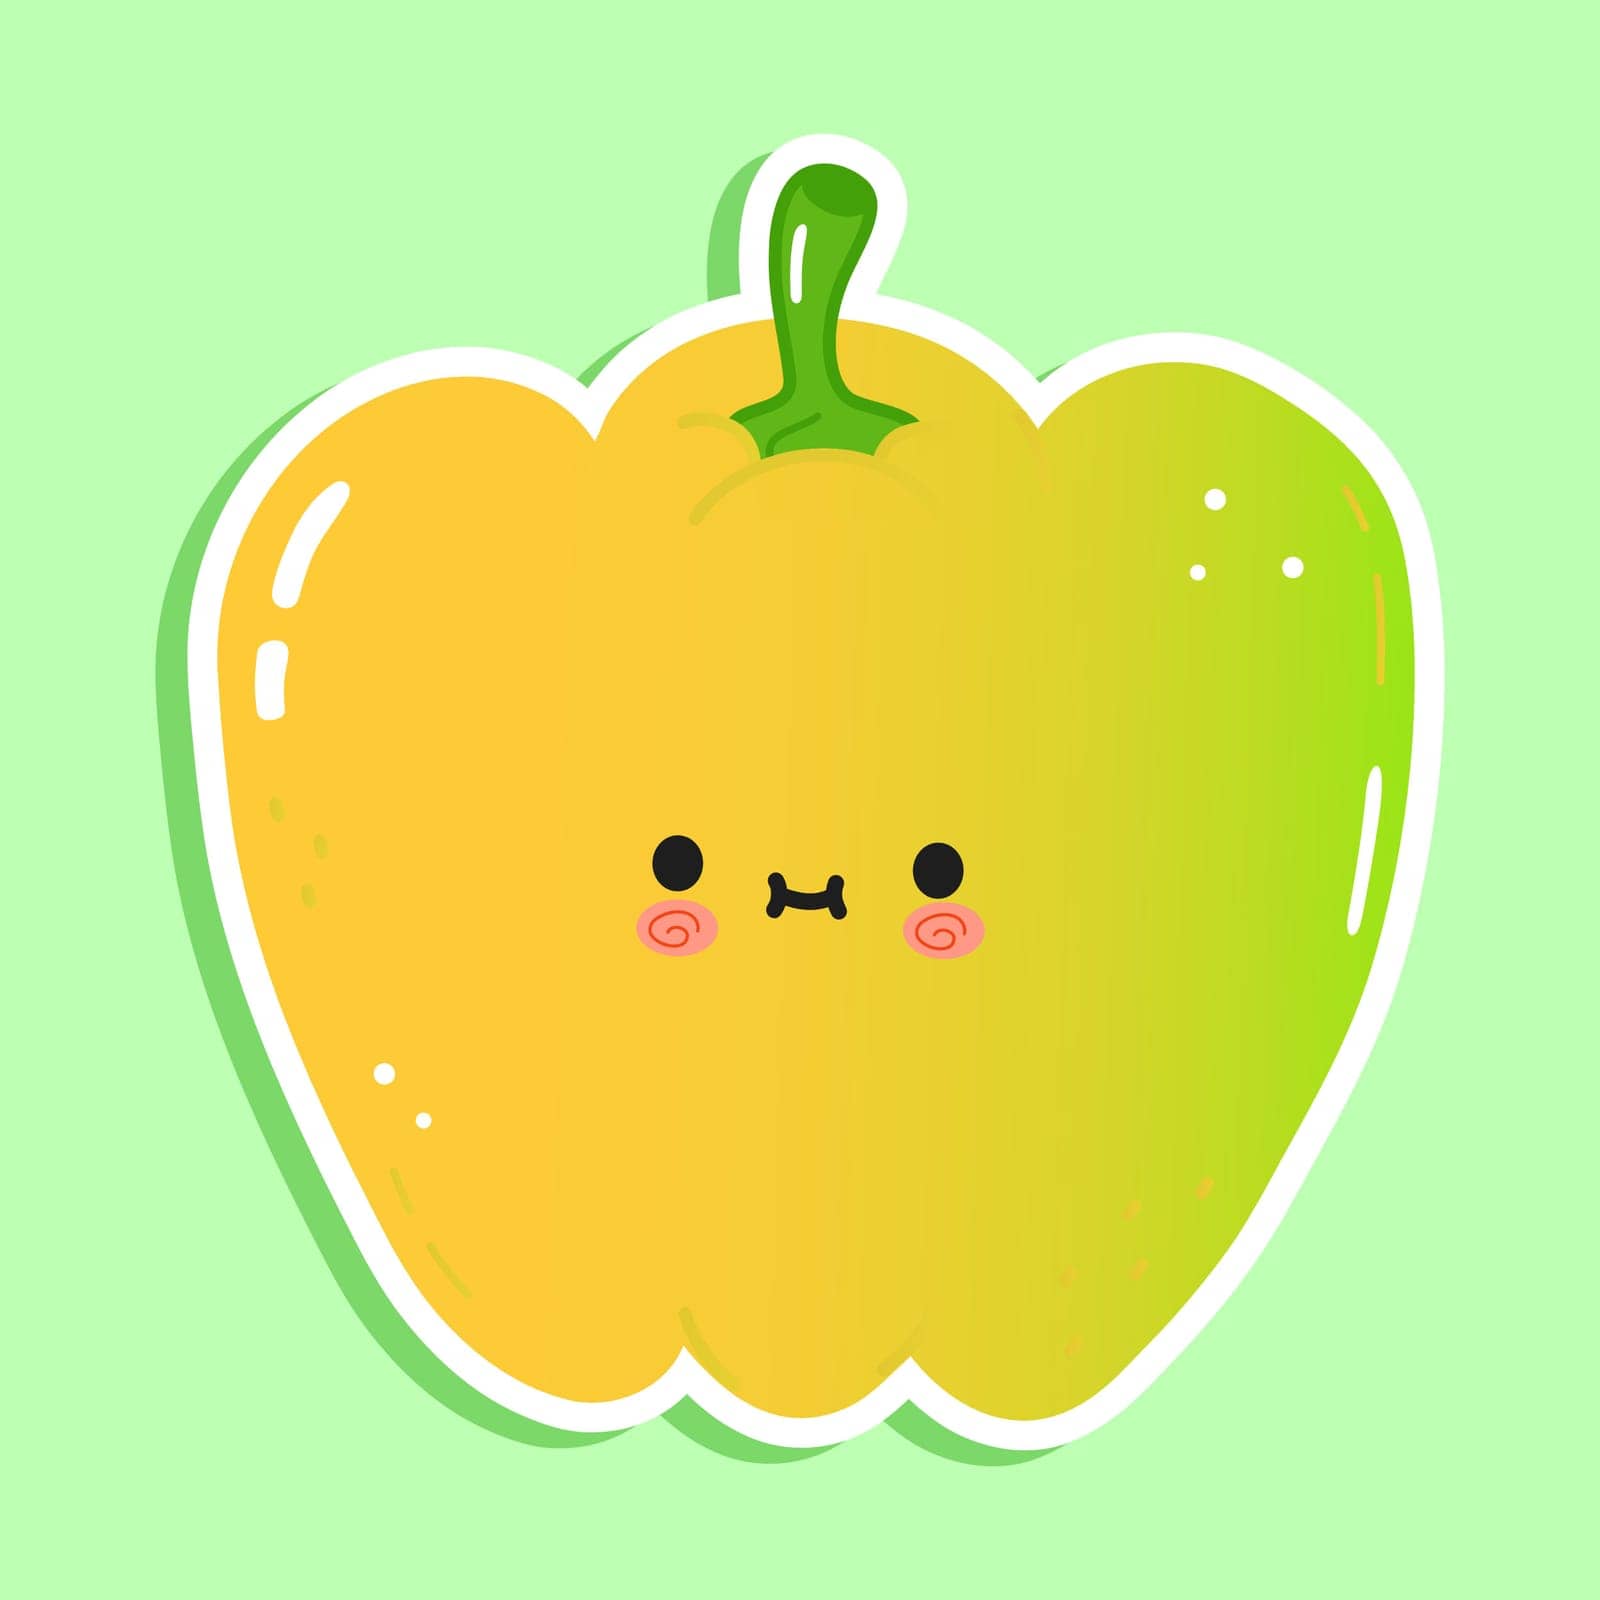 Cute funny colored bell pepper sticker character. Vector hand drawn cartoon kawaii character illustration icon. Isolated on green background. Colored bell pepper character concept by Caspian